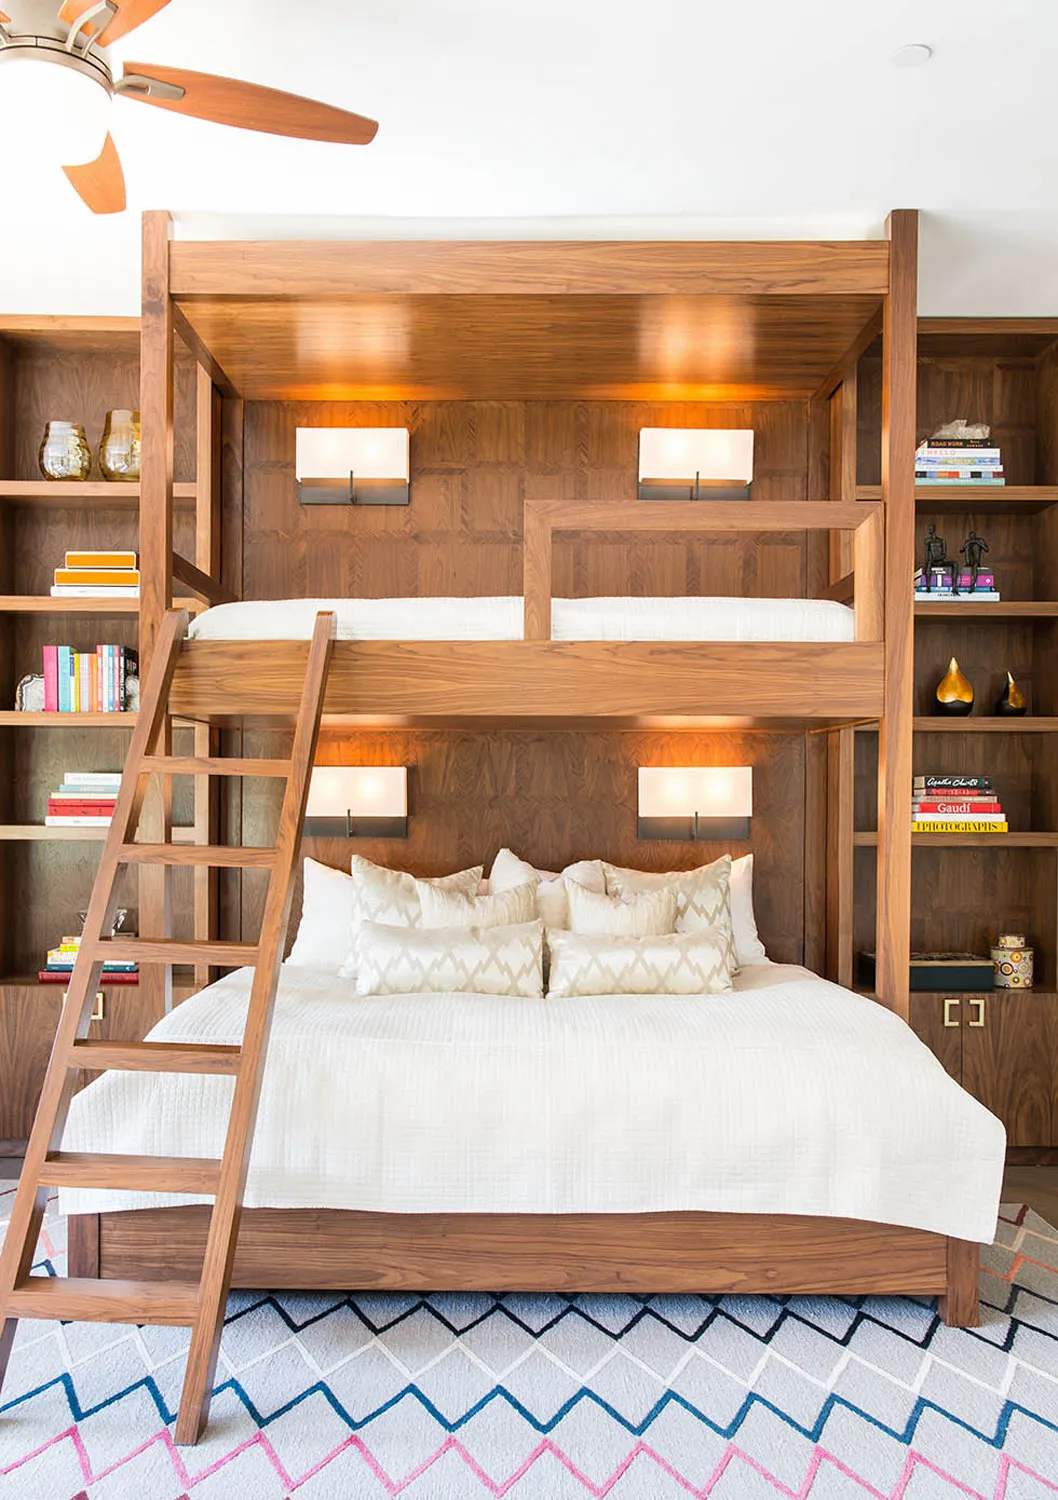 Queen Bunk Beds Come in A Variety of Sizes